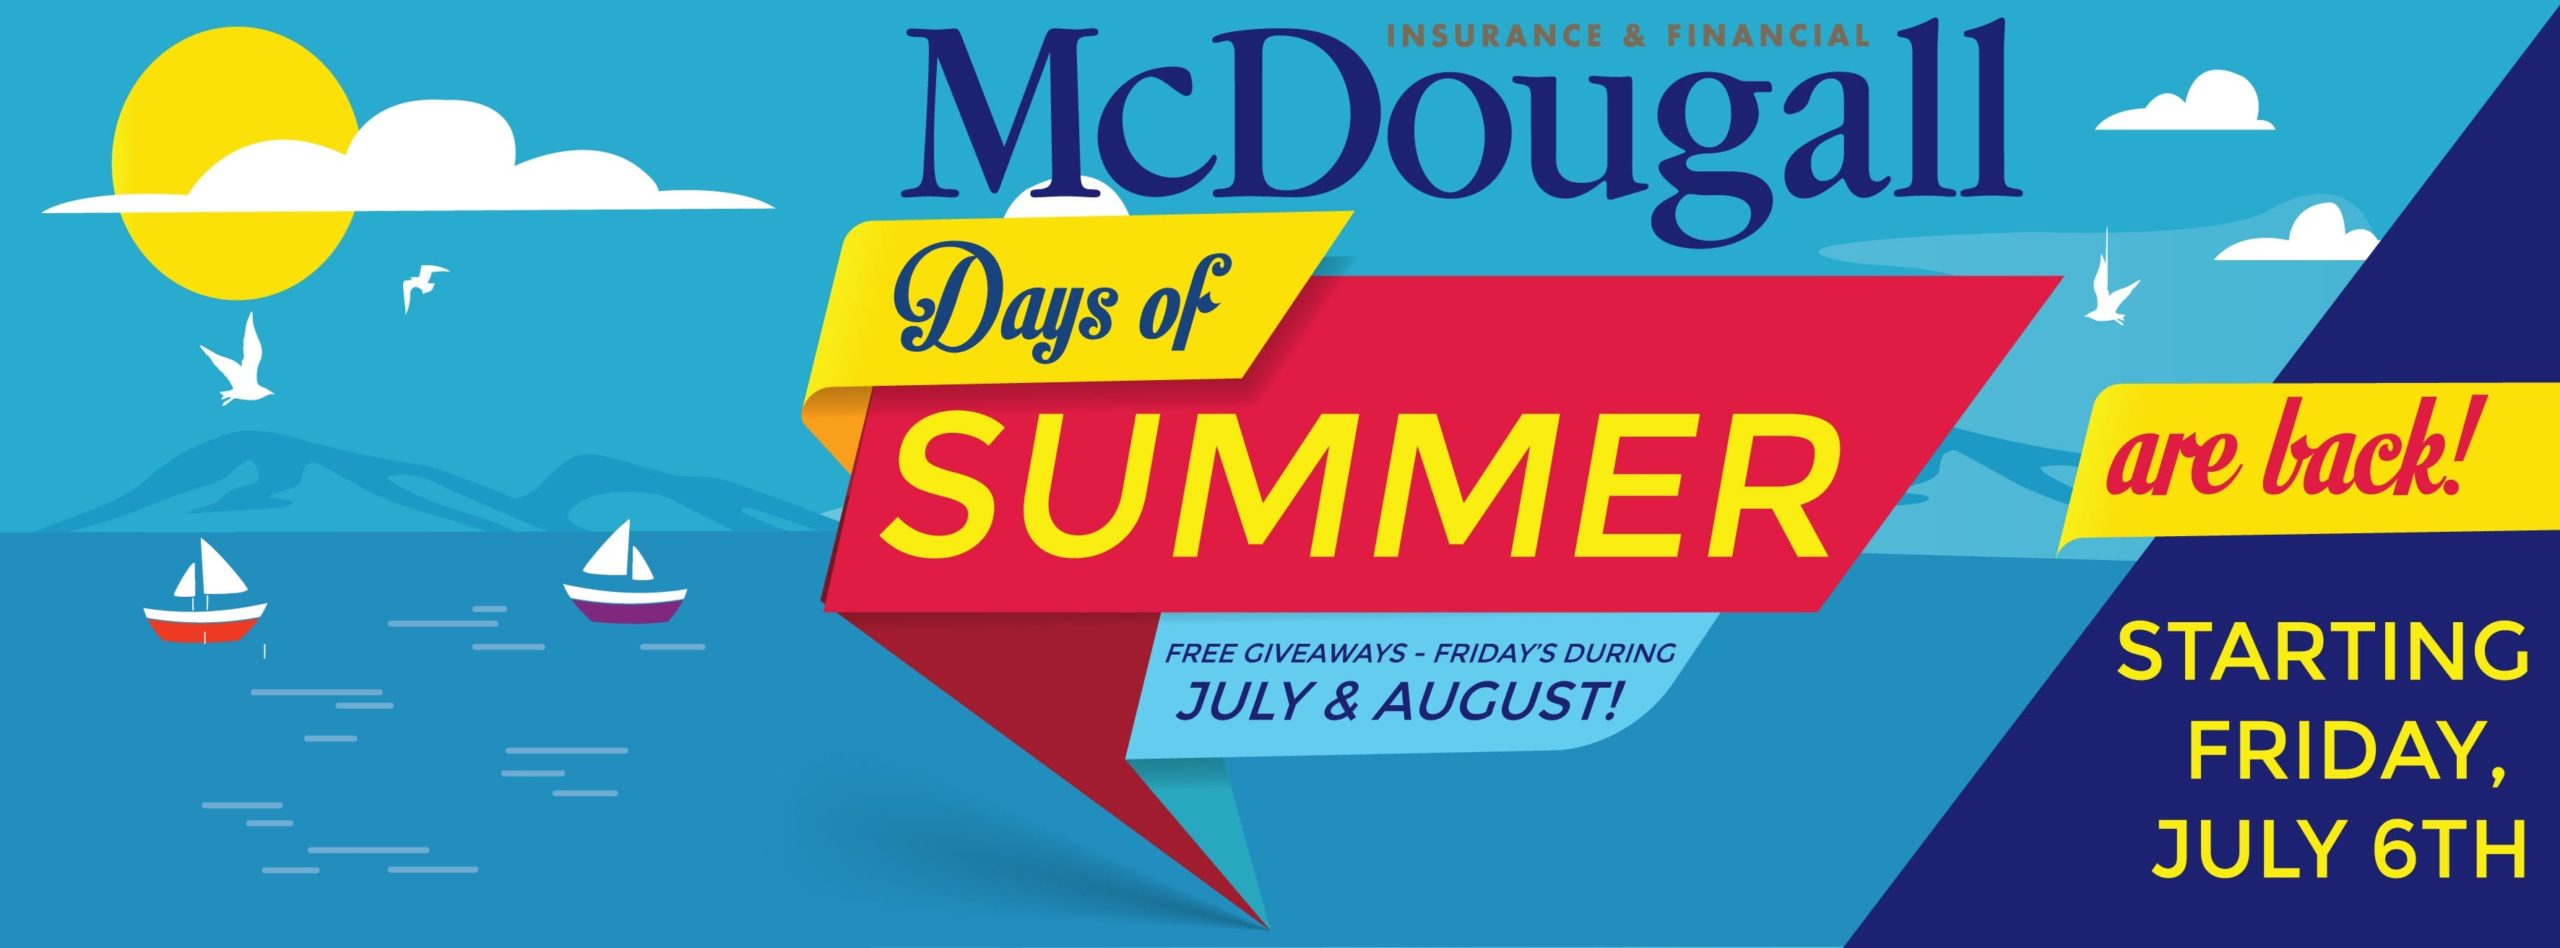 Facebook banner for McDougall Days of Summer, July and August